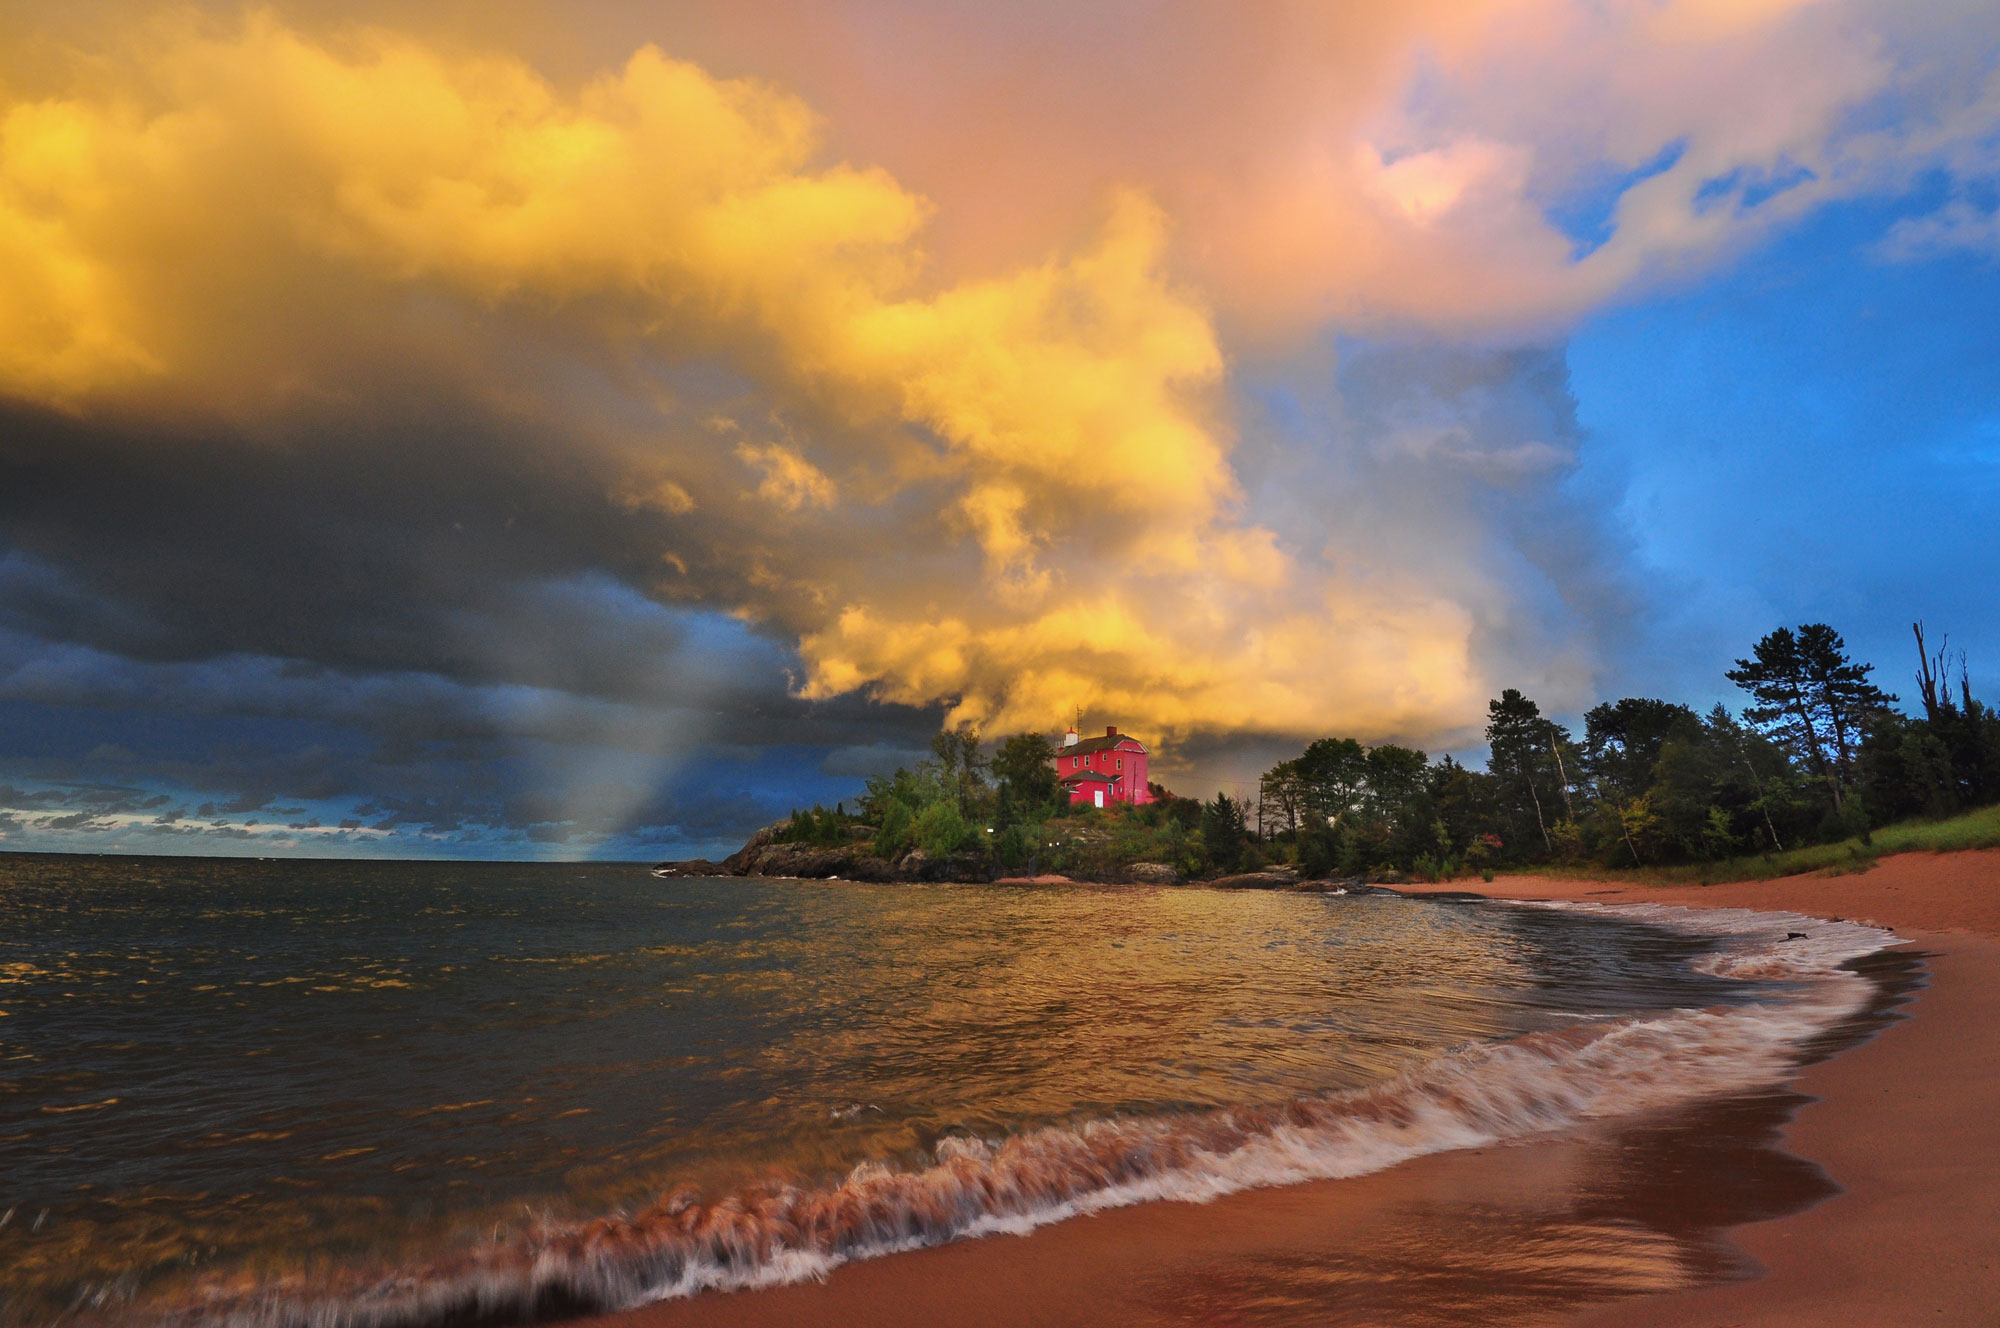 Photograph of the shore of Lake Michigan in Marquette, Michigan during the fall. The photo shows the shoreline of the lake arcing away from the center foreground, with a narrow sandy beach on the right and water on the left. In the distance, a red building stands on a low point of land, where it is surrounded by trees. The sky above is blue with fluffy clouds lit dramatically by the sun.